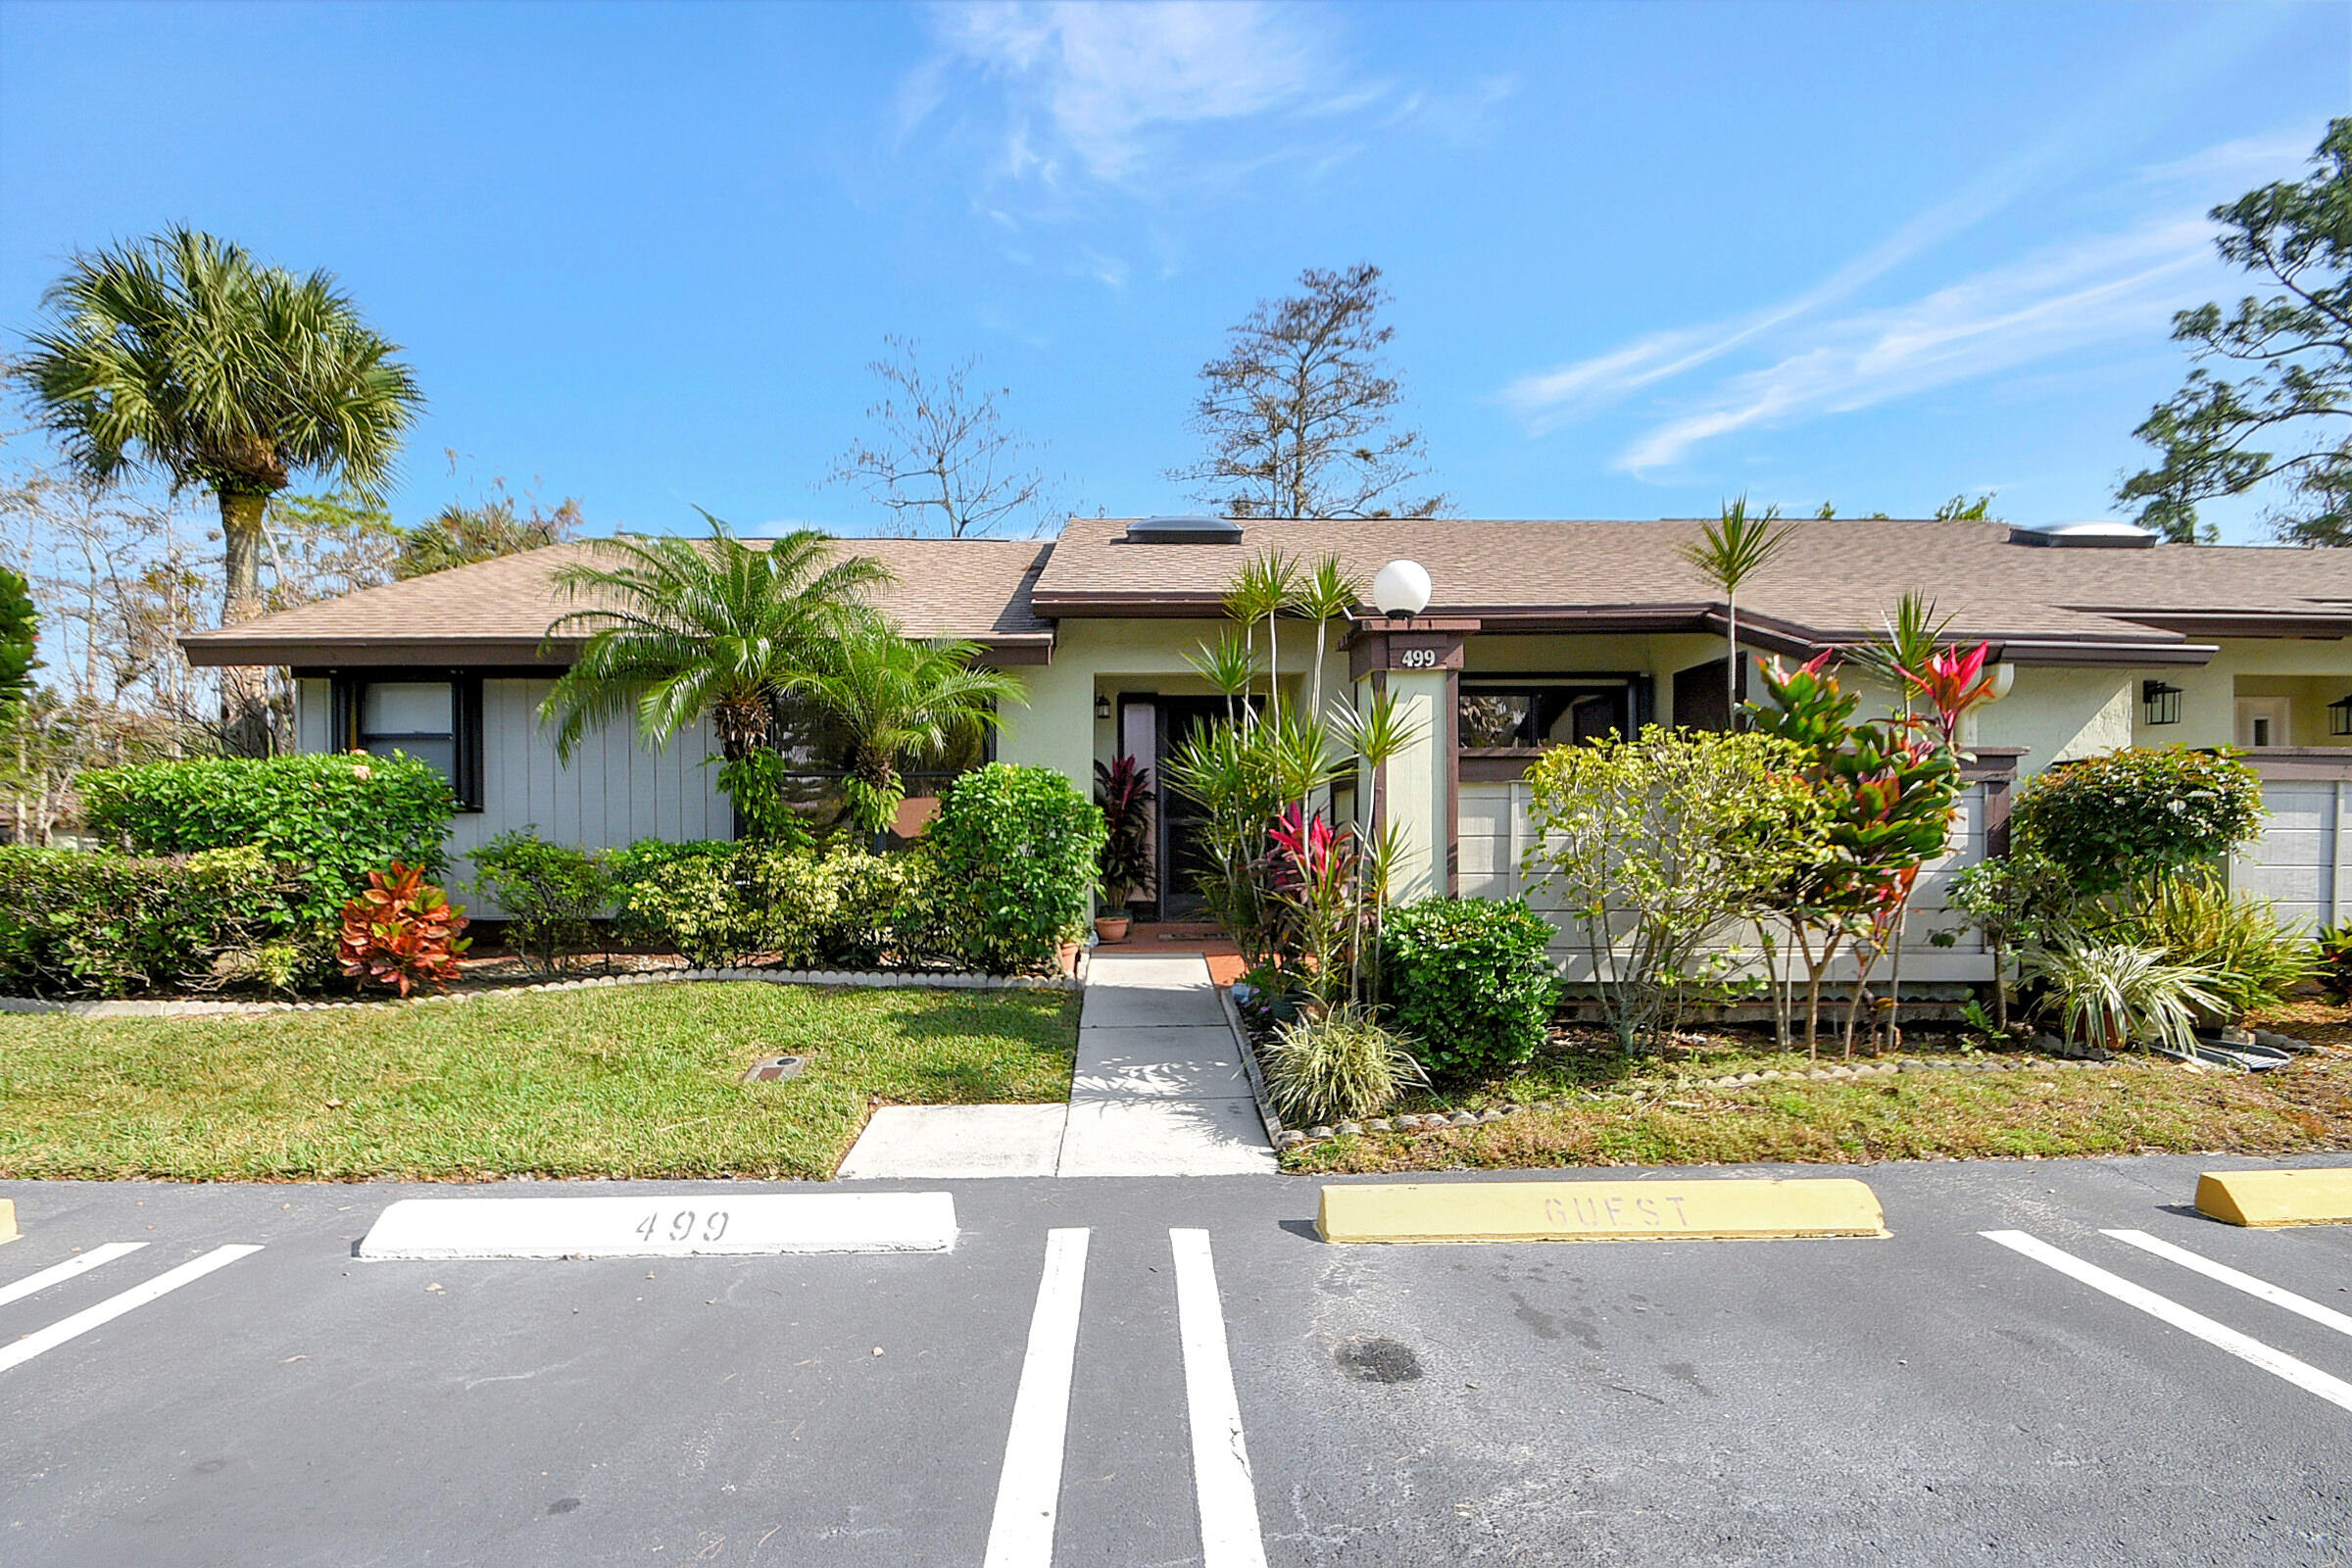 Property for Sale at 499 Iron Forge Court, Royal Palm Beach, Palm Beach County, Florida - Bedrooms: 3 
Bathrooms: 2  - $310,000